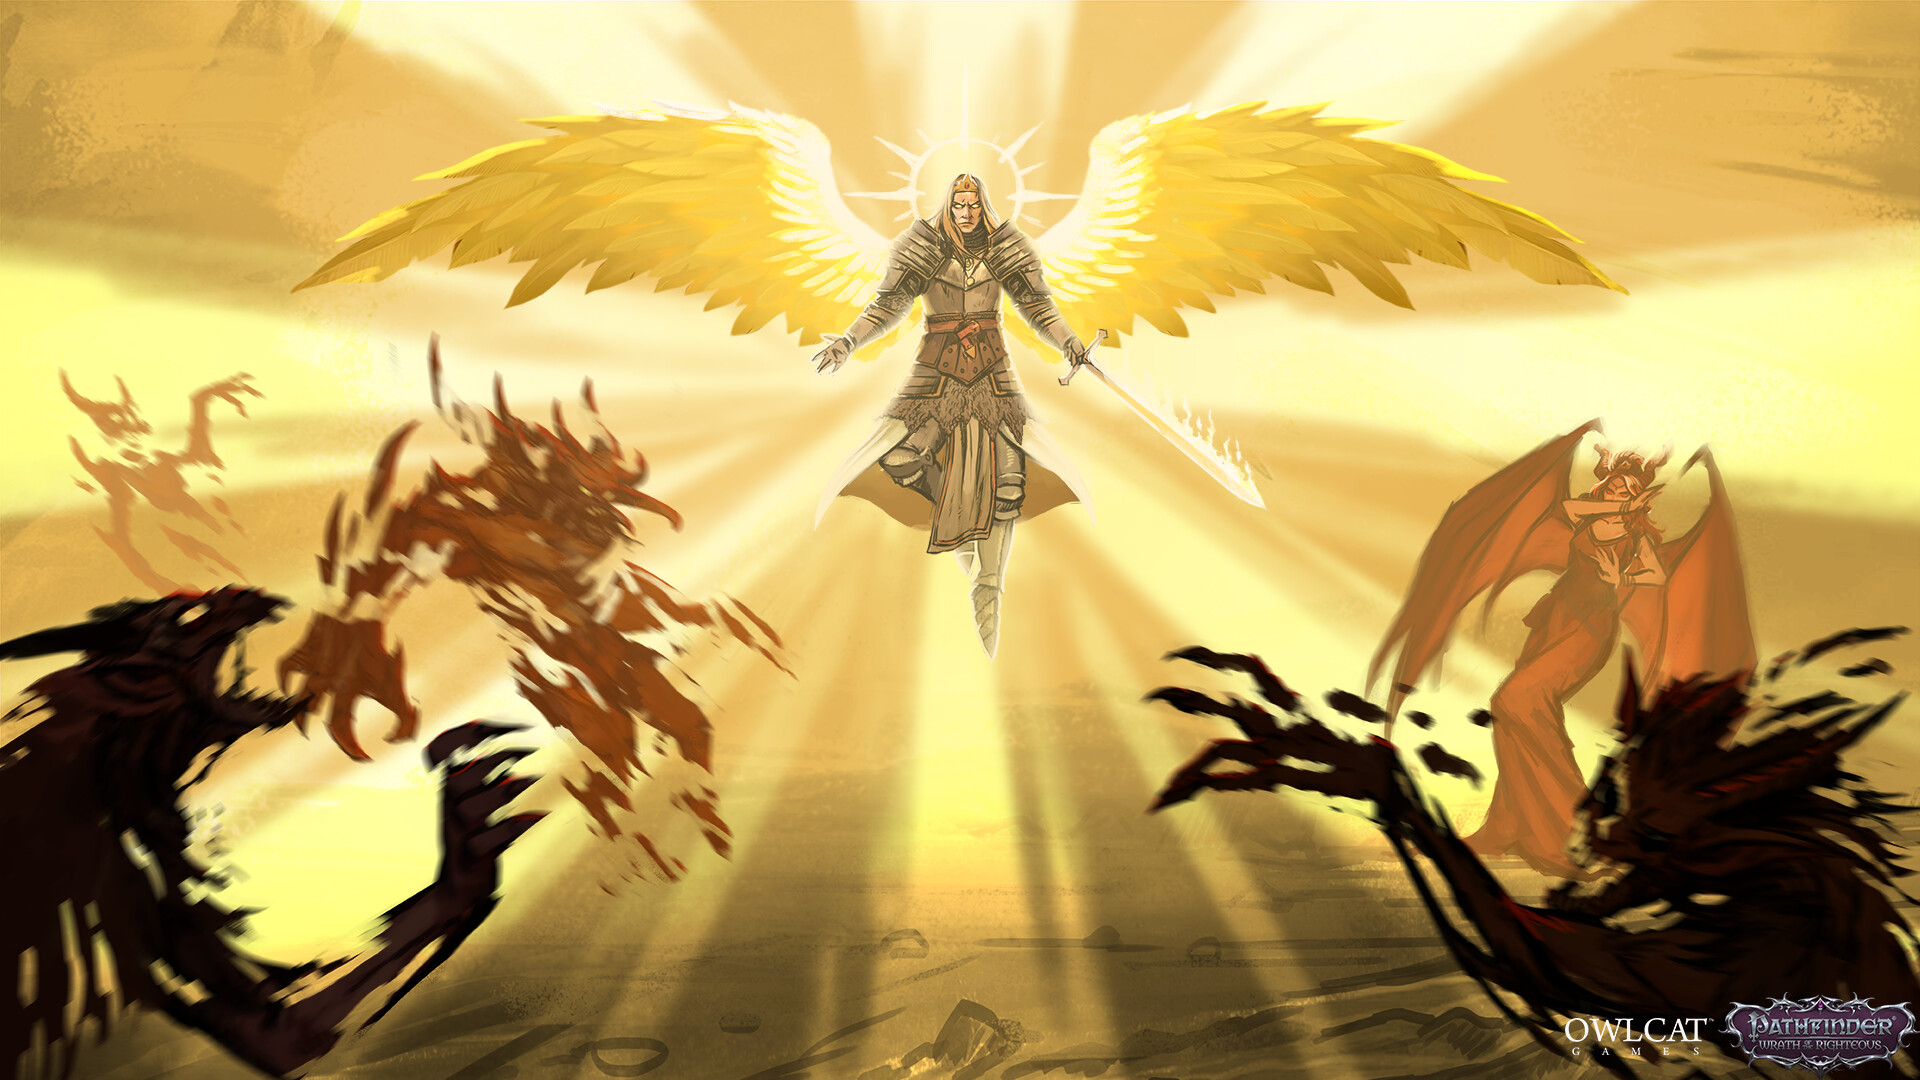 HD wallpaper of Pathfinder: Wrath of the Righteous featuring an angelic figure with golden wings illuminated by divine light amidst shadowy creatures, perfect for desktop backgrounds.